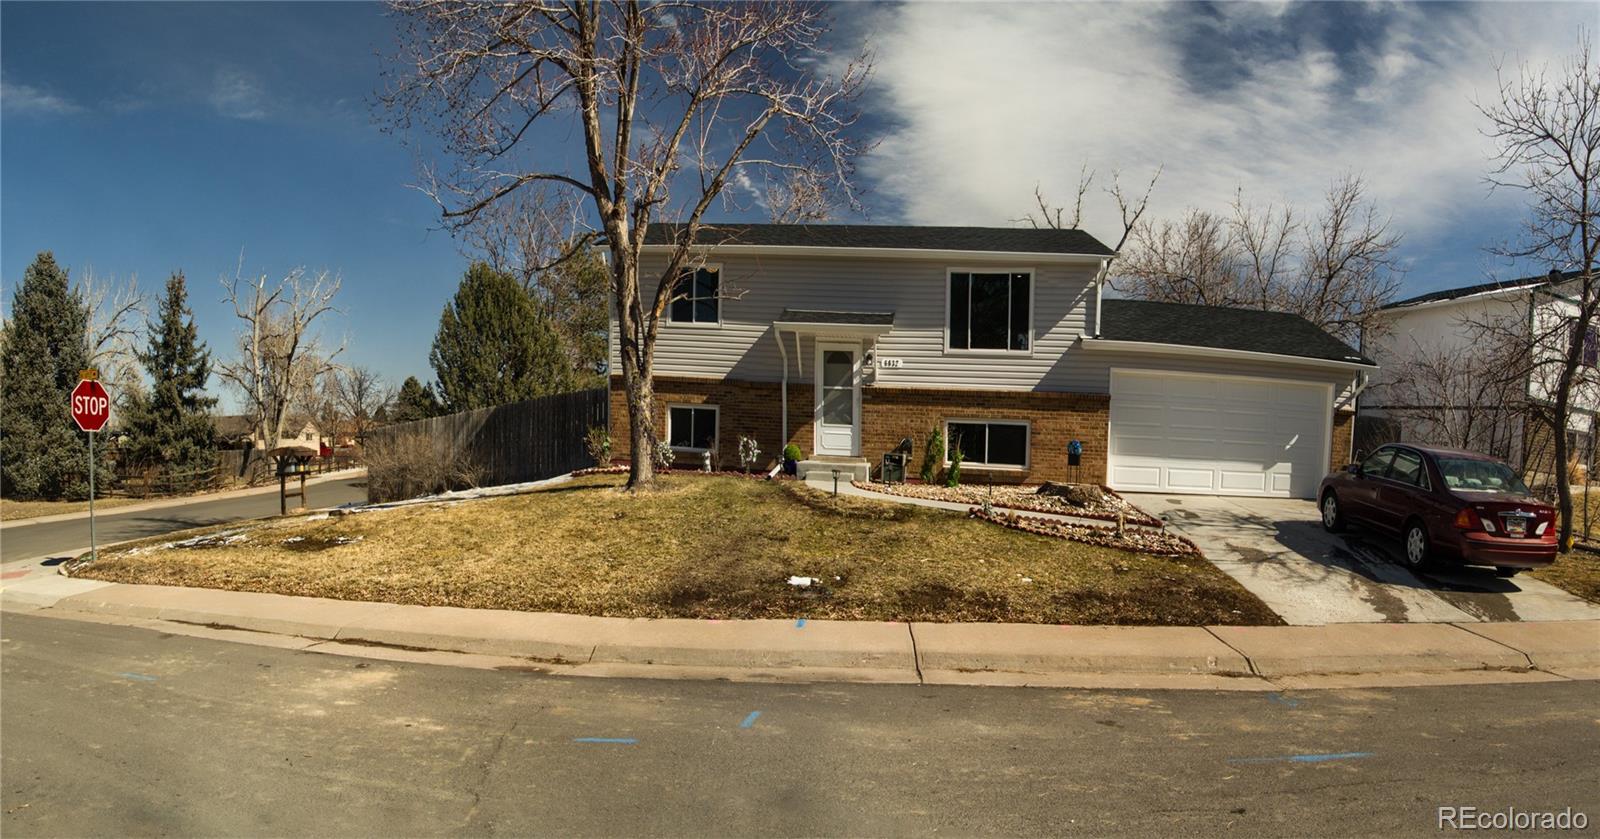 Report Image for 6632 S Dover Way,Littleton, Colorado